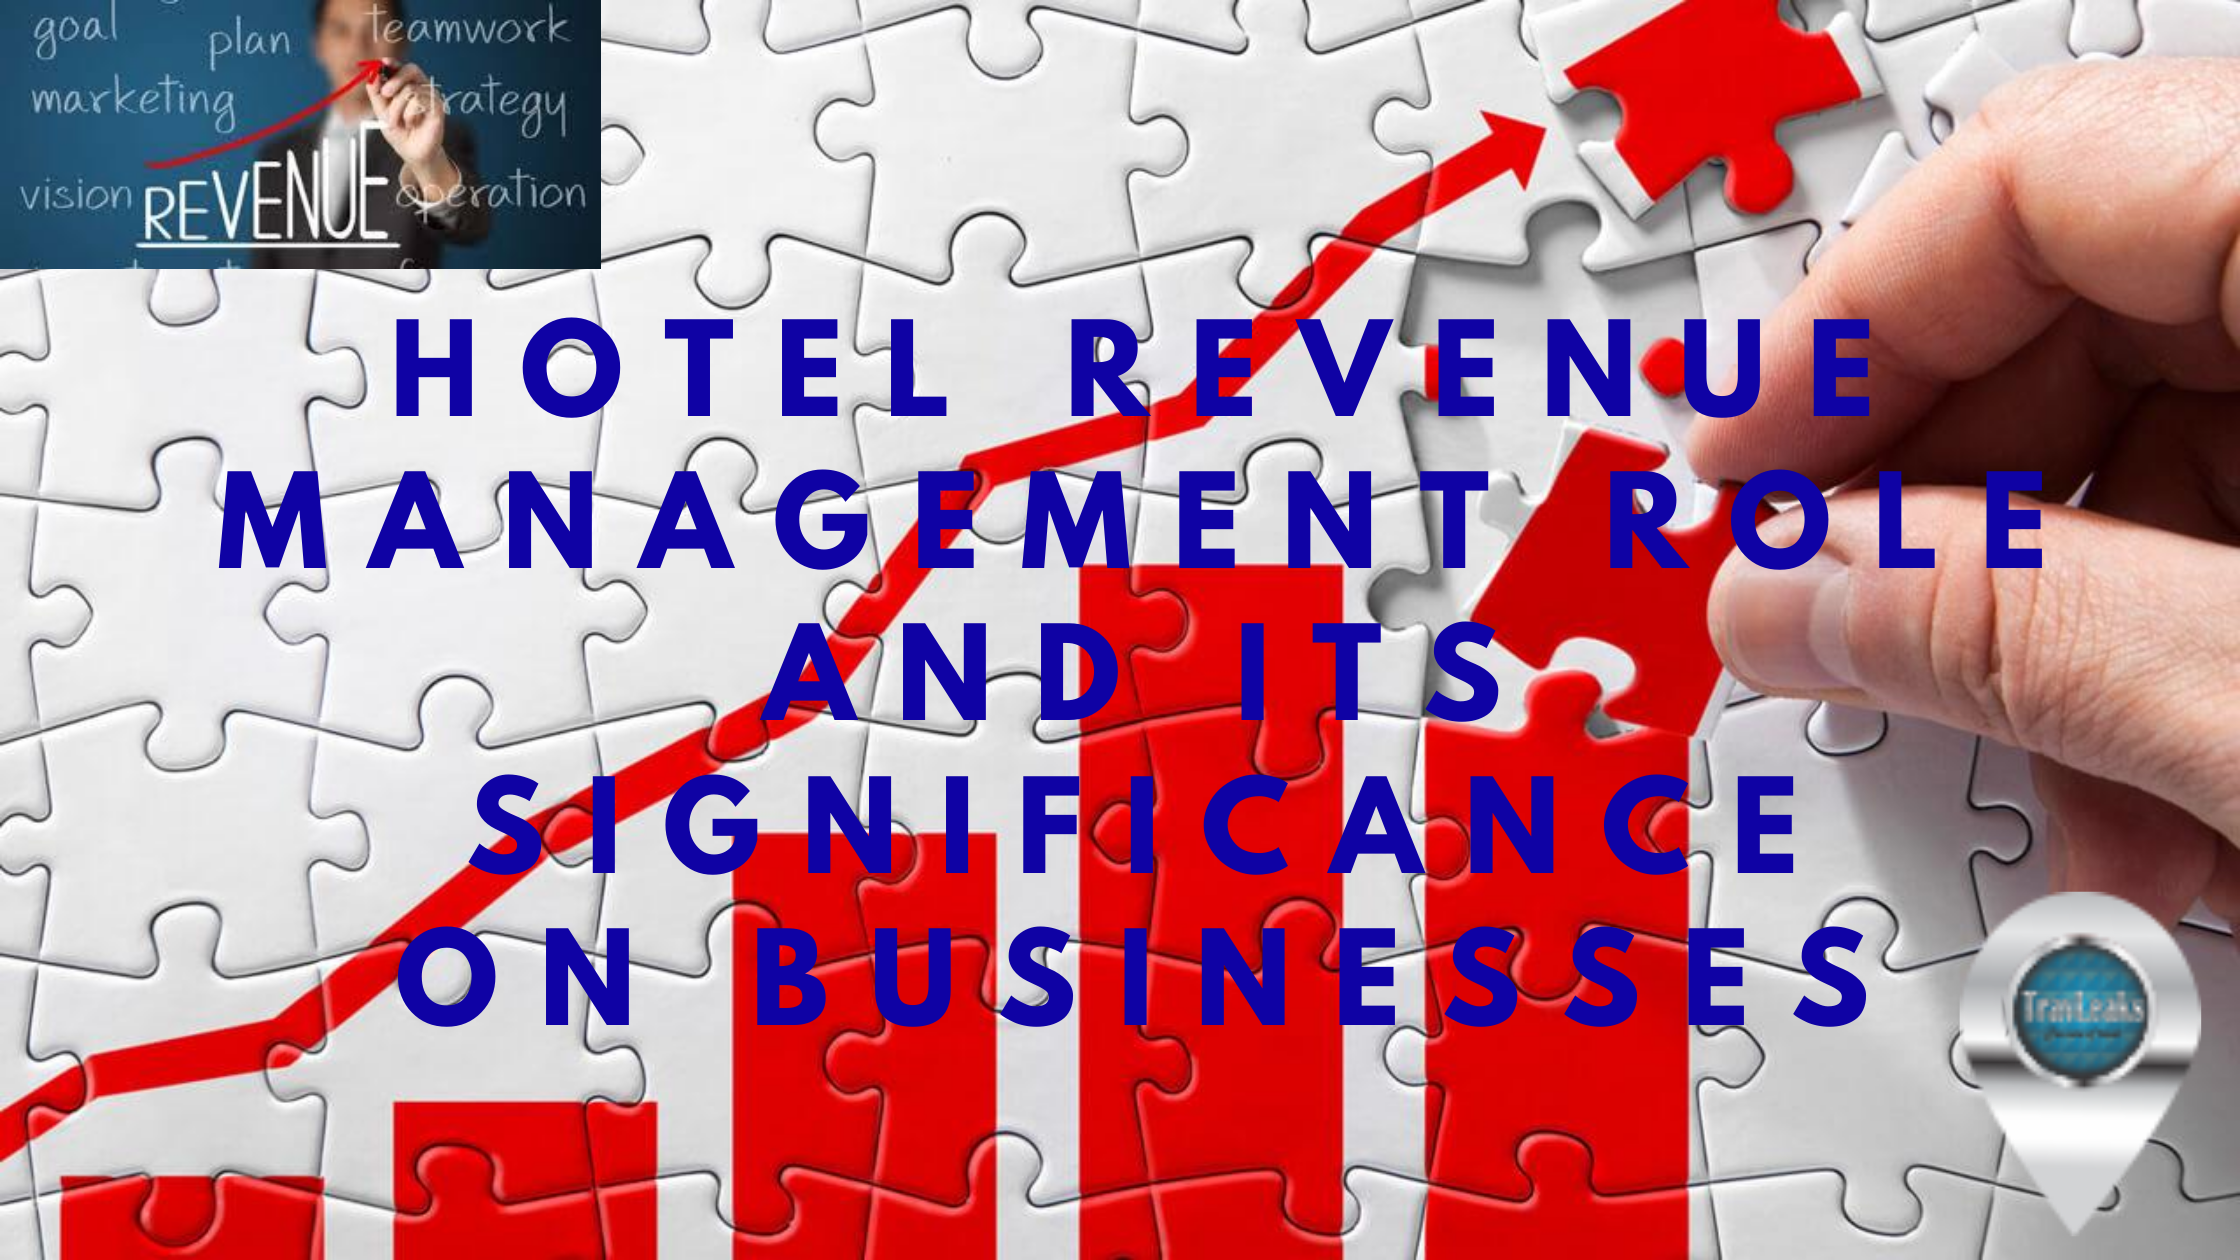 how-significant-revenue-management-role-for-hotel-property-travleaks